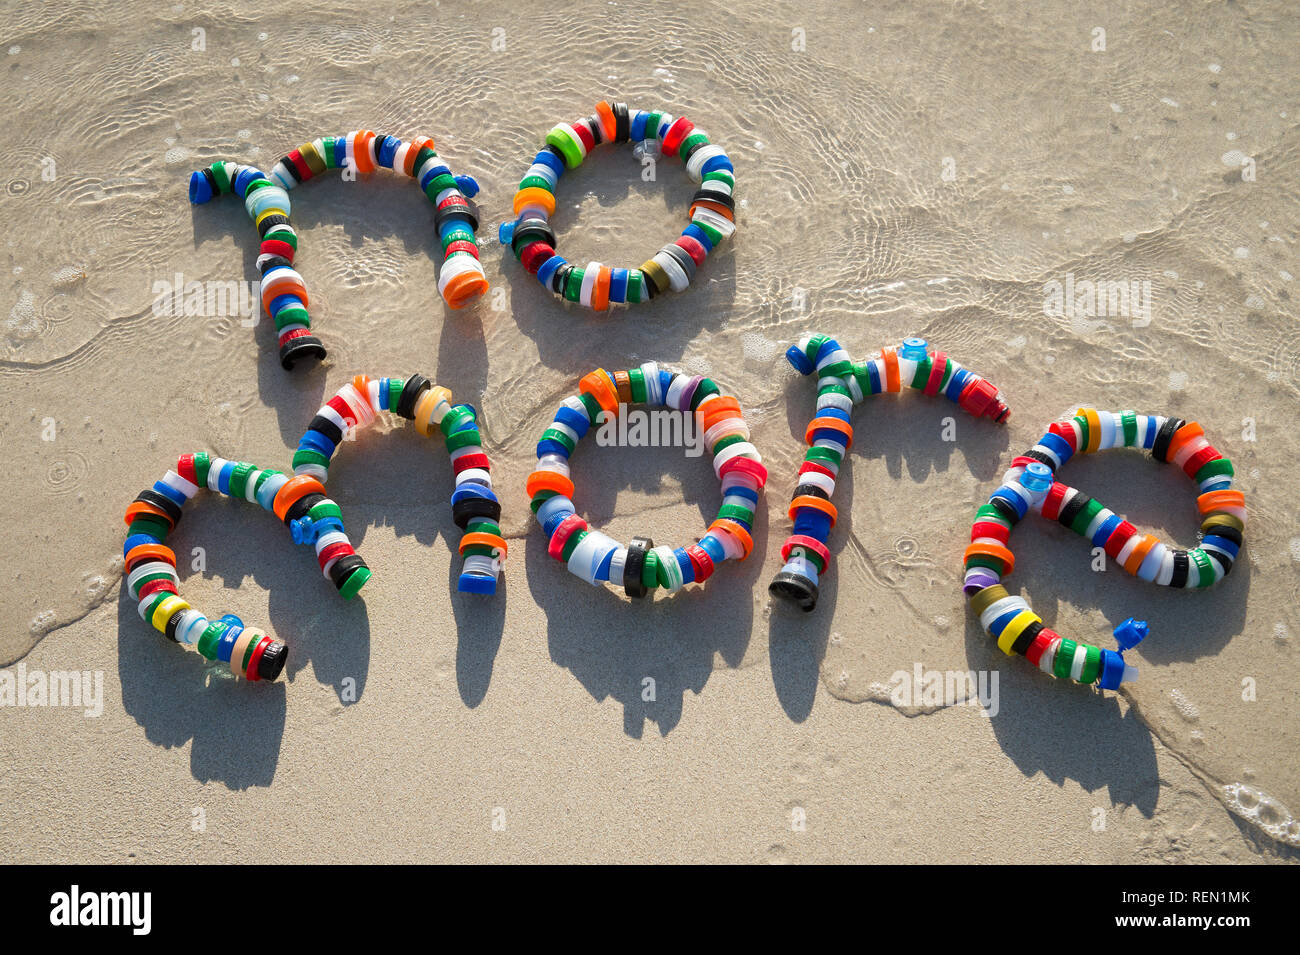 No More message made from colorful used plastic bottle cap garbage on the smooth sand shore of a tropical beach Stock Photo